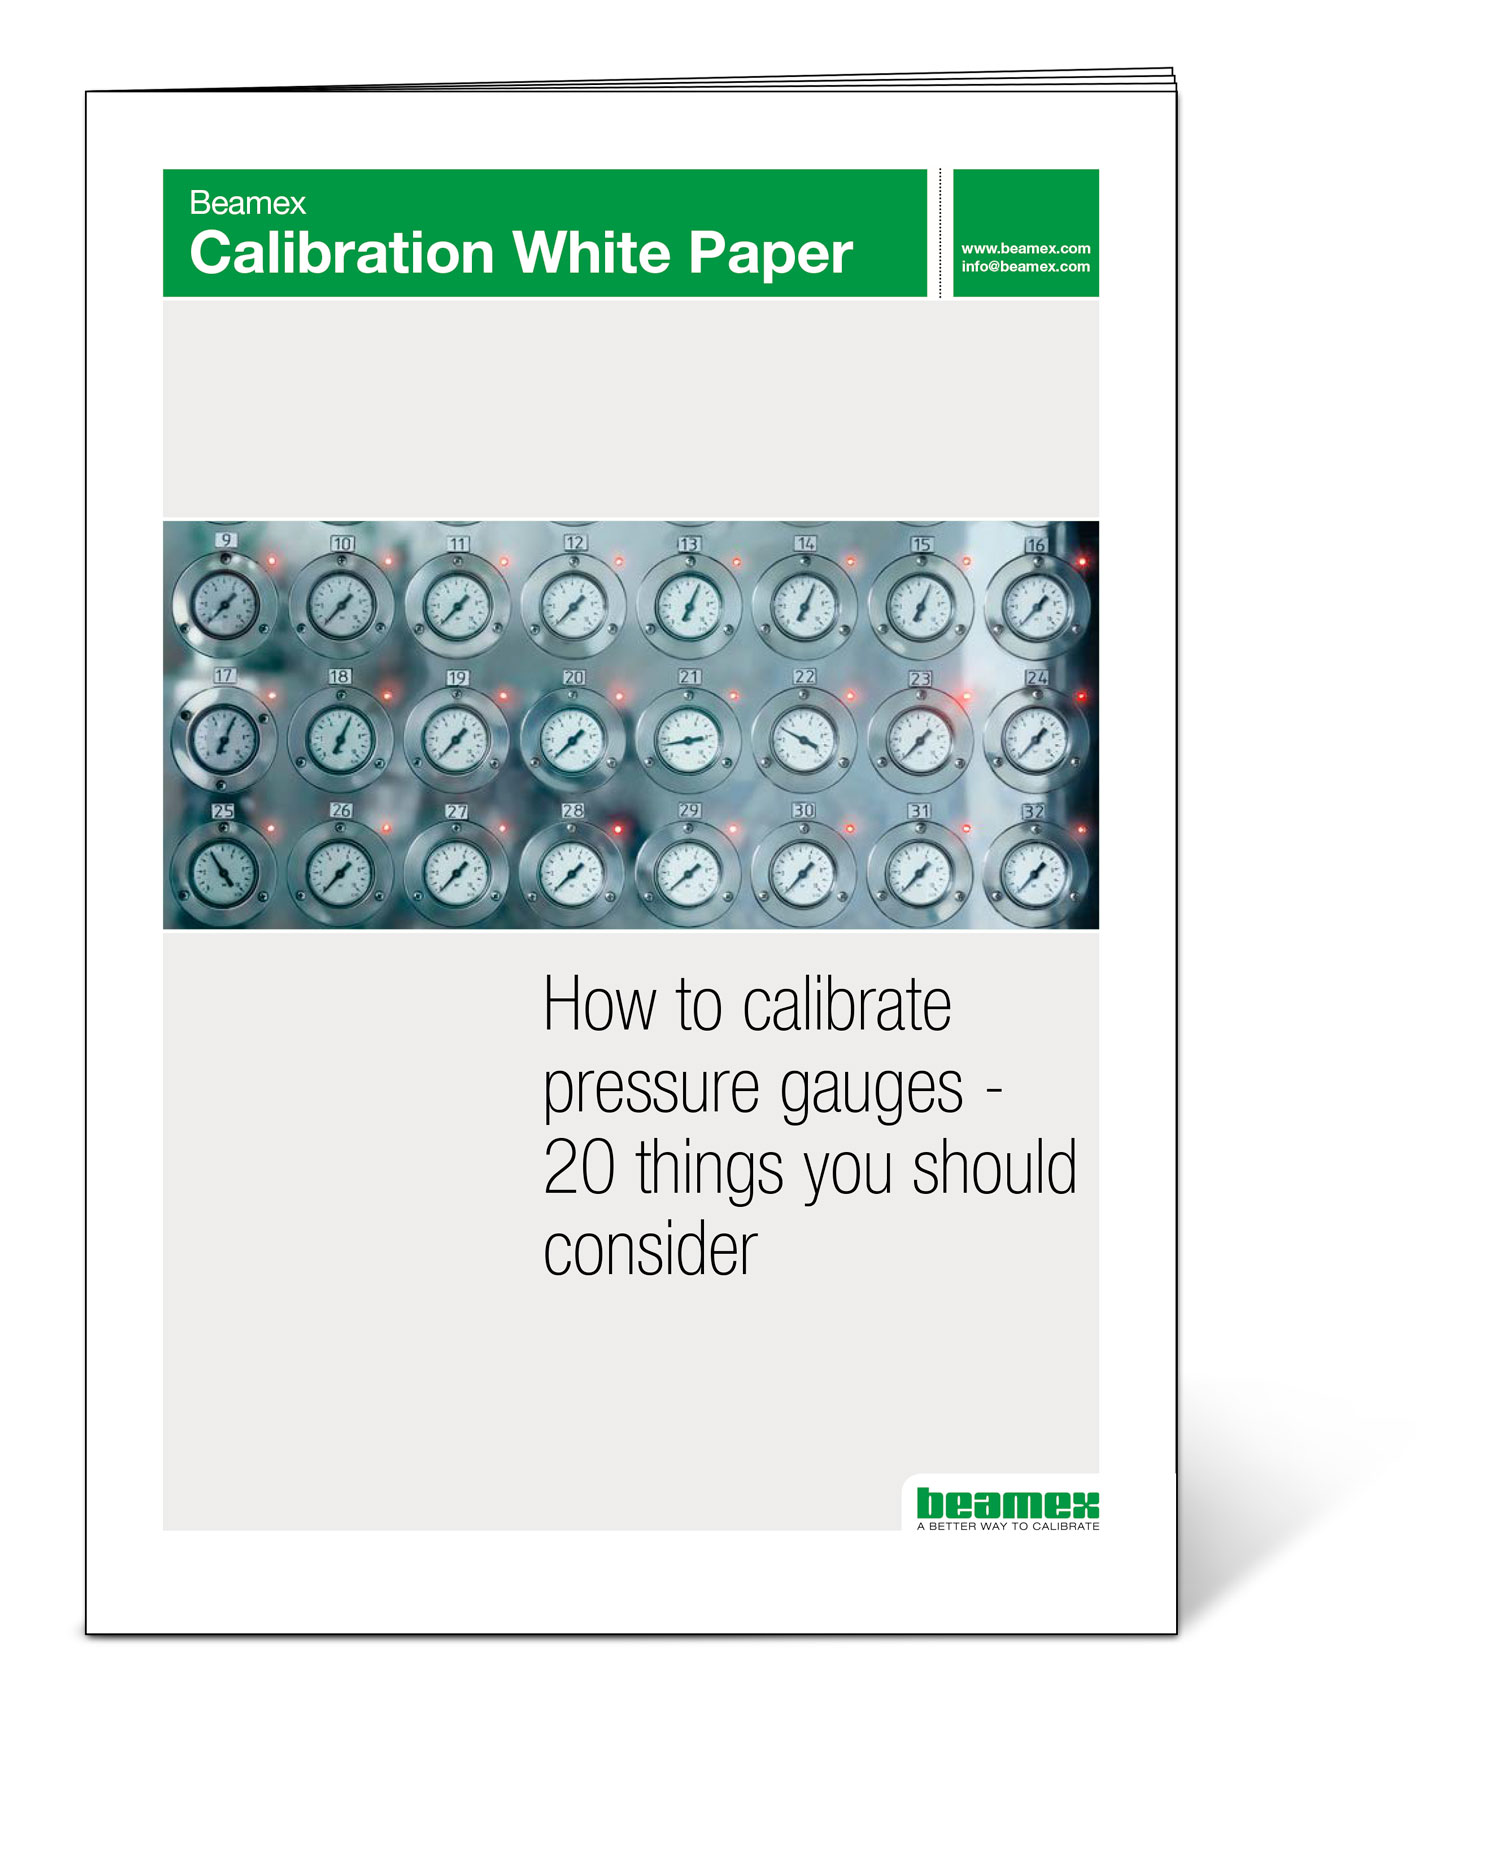 https://2203666.fs1.hubspotusercontent-na1.net/hubfs/2203666/Beamex_White_Papers/Beamex-WP-How-to-calibrate-pressure-gauges-1500px-v1.jpg